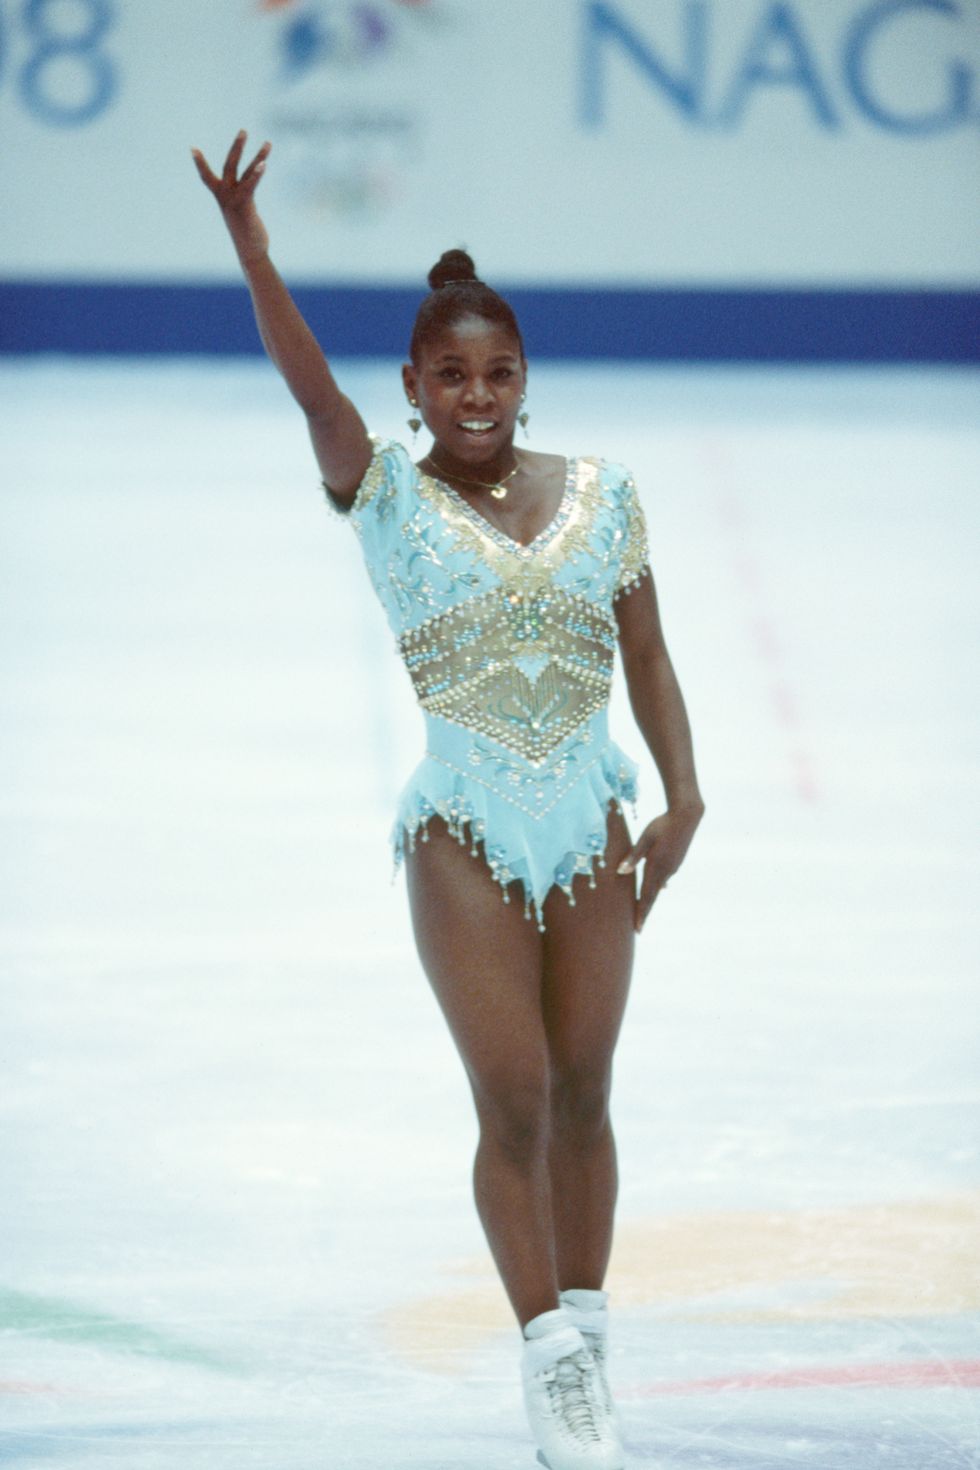 33 Best Ice Skating Outfits - Iconic Outfits Worn by Famous Figure Skaters